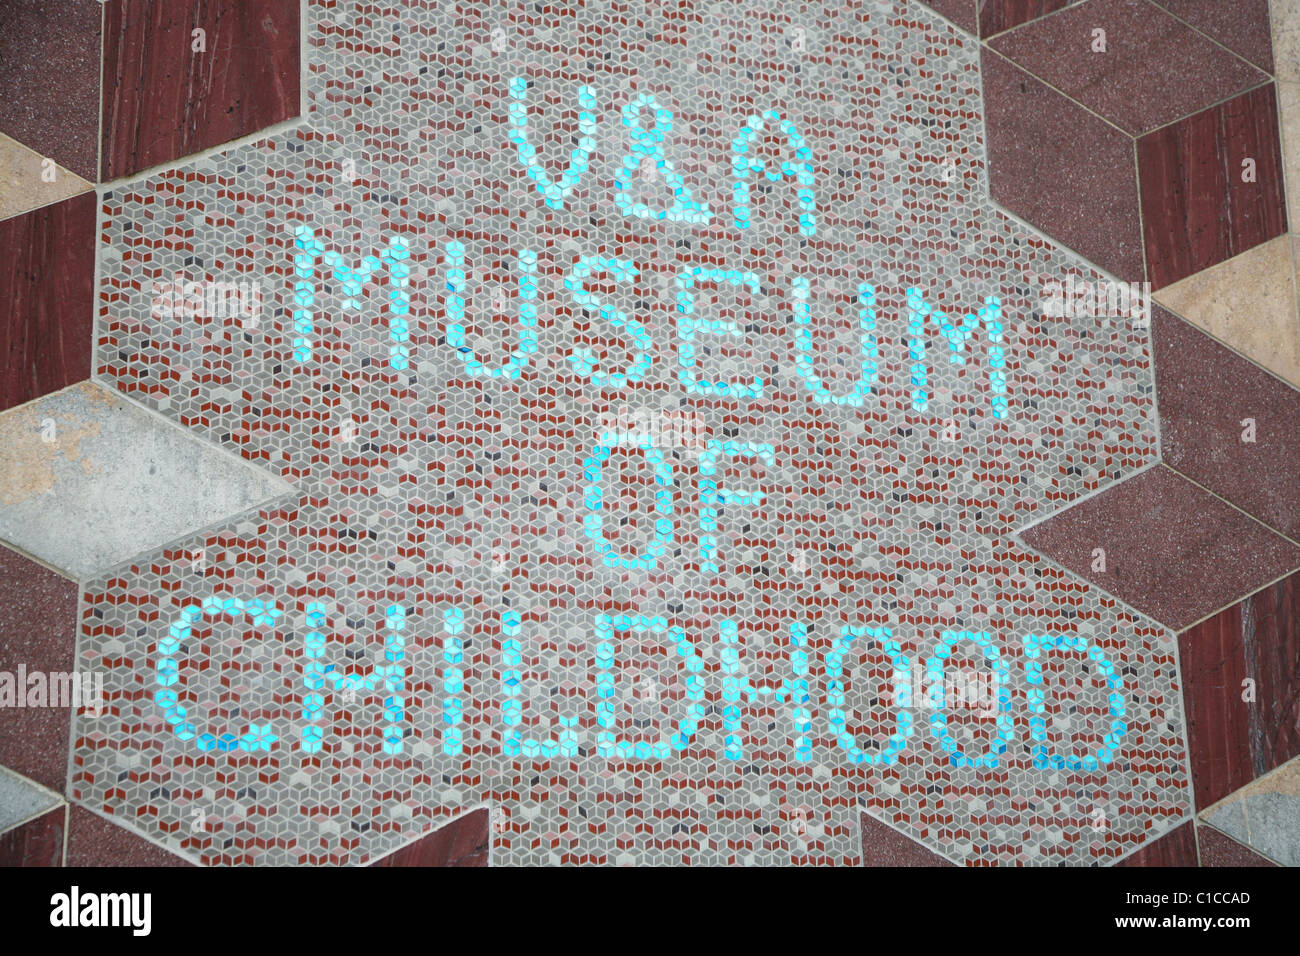 General View GV of the Victoria and Albert Museum of Childhood in Bethnal Green, London, England. Stock Photo